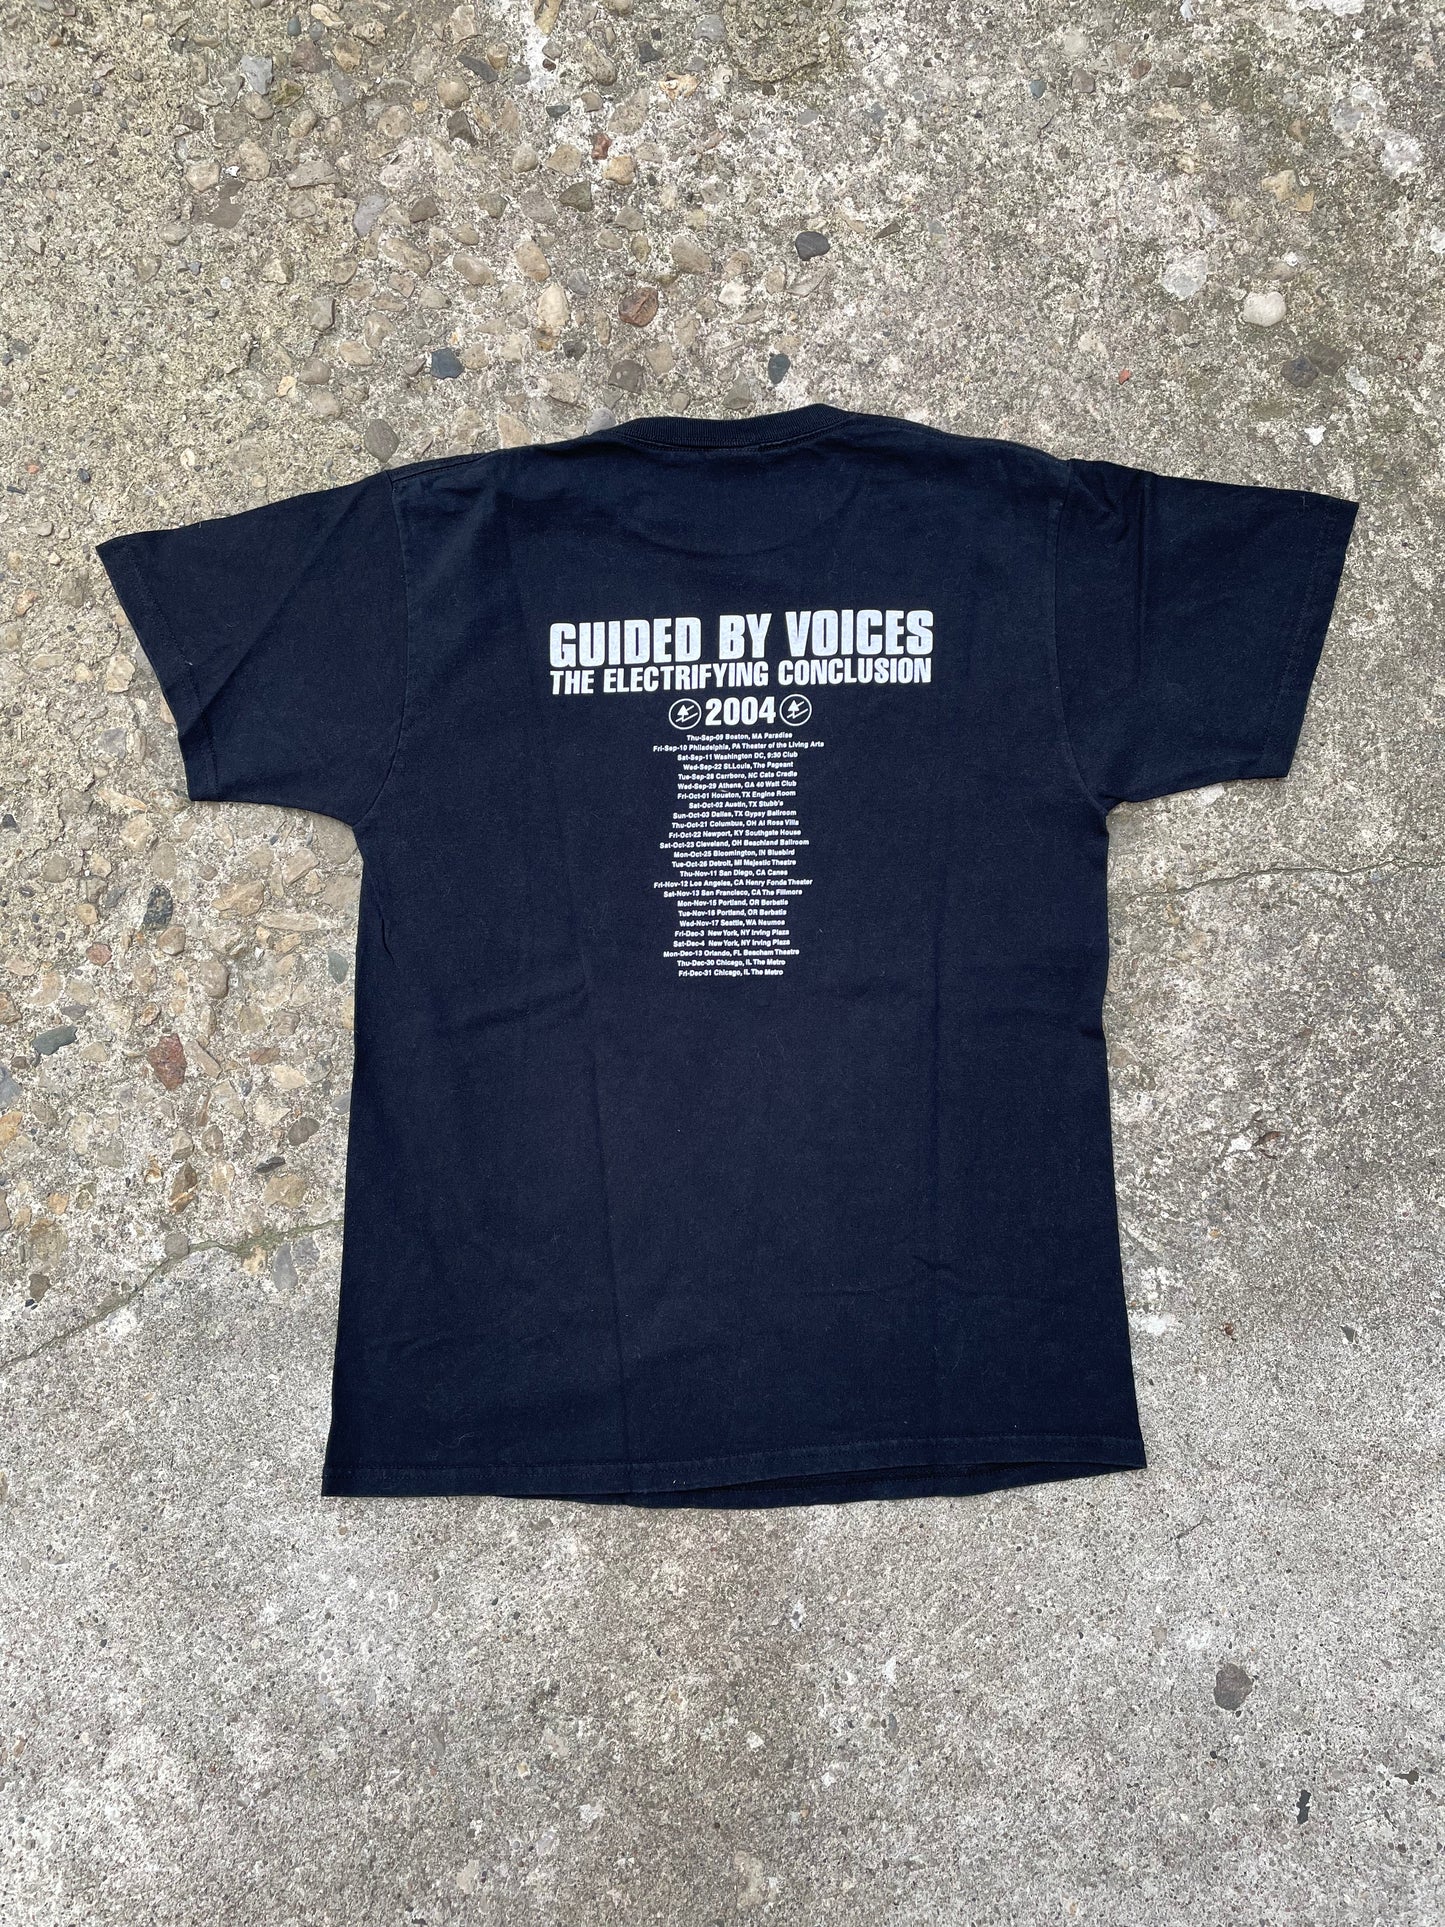 2004 'Mission: Accomplished' Guided By Voices The Electrifying Conclusion Tour Band T-Shirt - M